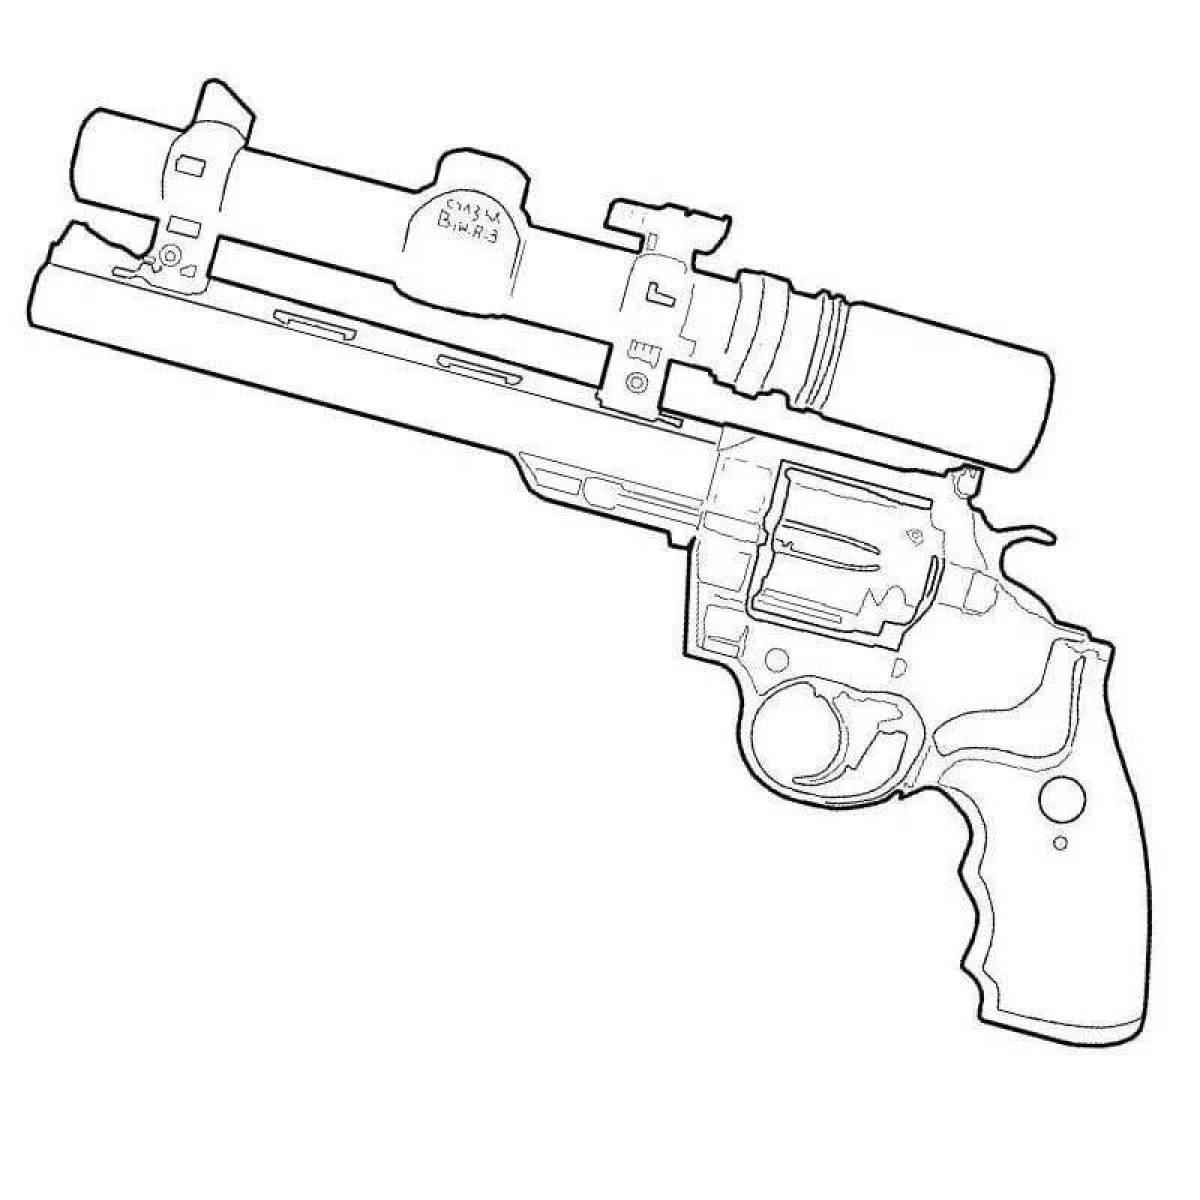 Intriguing coloring page of standoff 2 skins